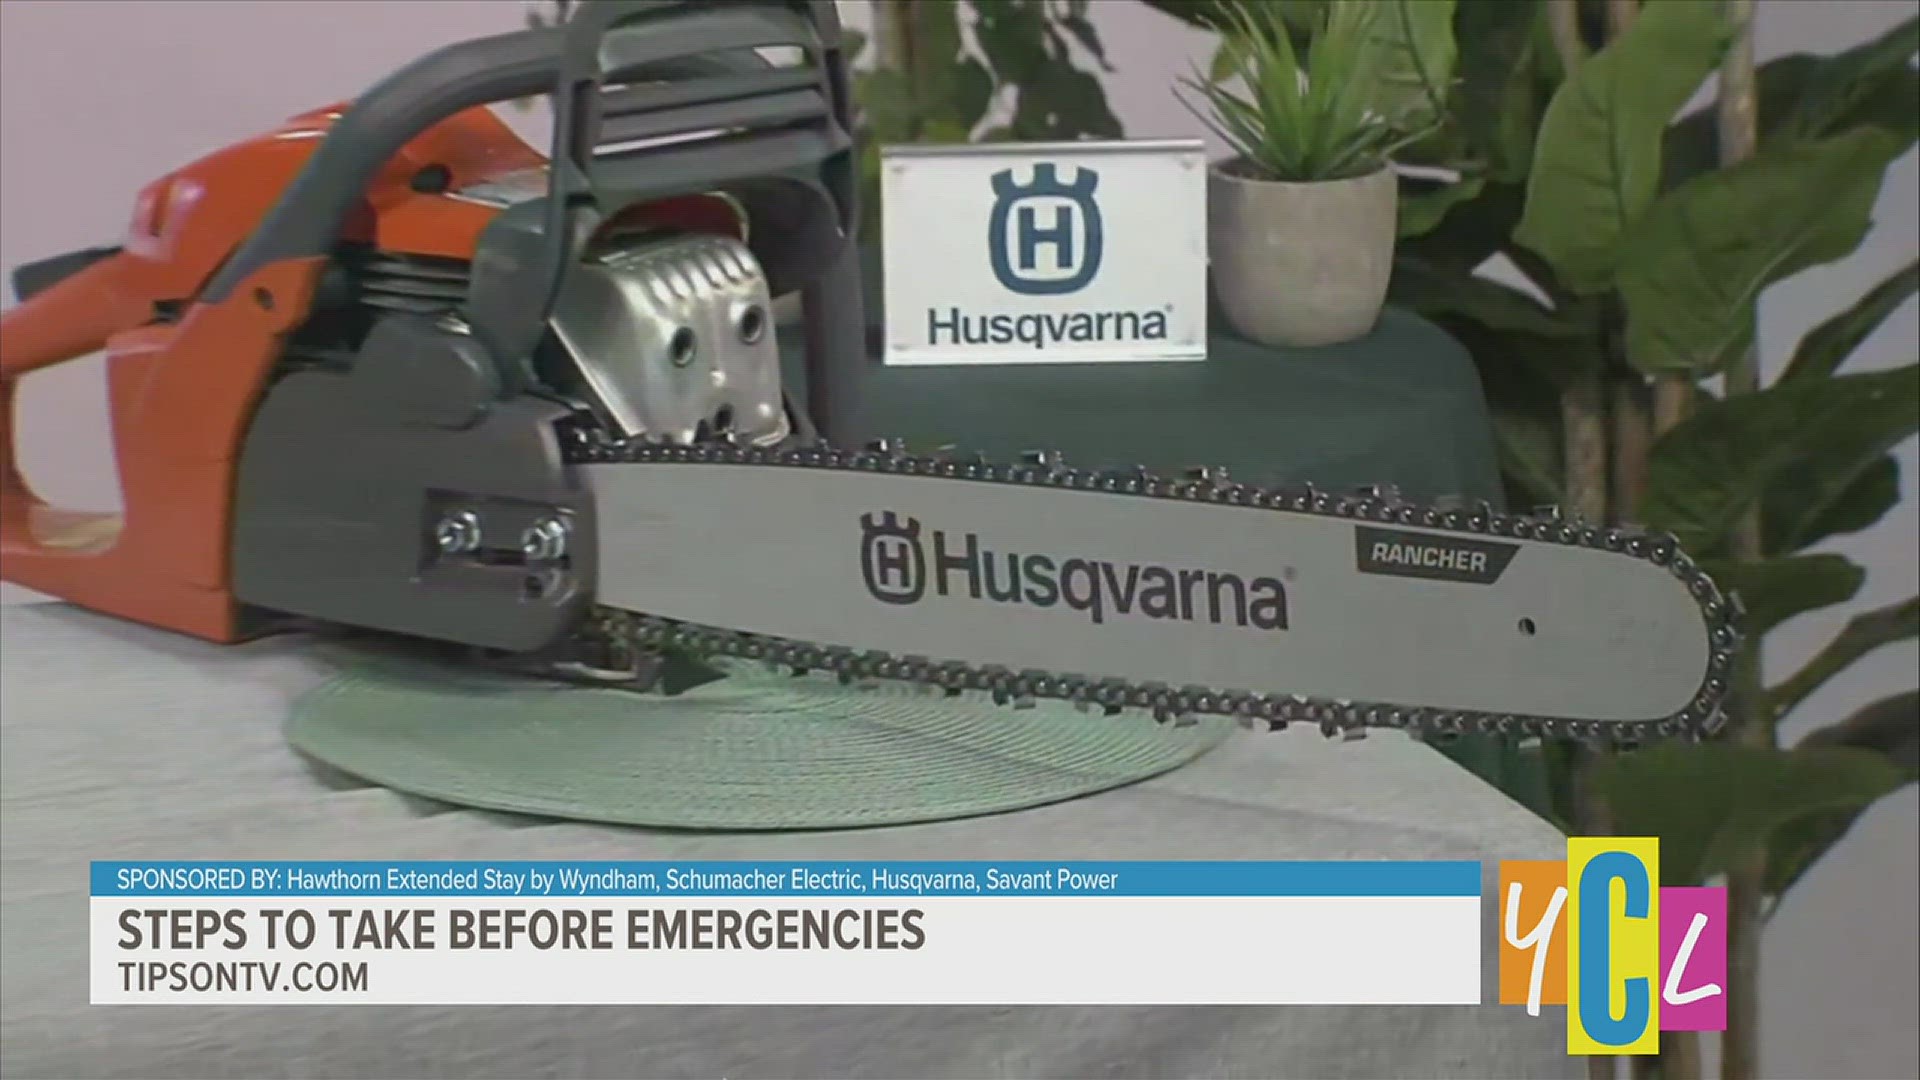 A FEMA disaster expert shares steps on how to prepare for any disaster. This segment is paid for by Hawthorn Extended Stay by Wyndham, Schumacher Electric, and more.